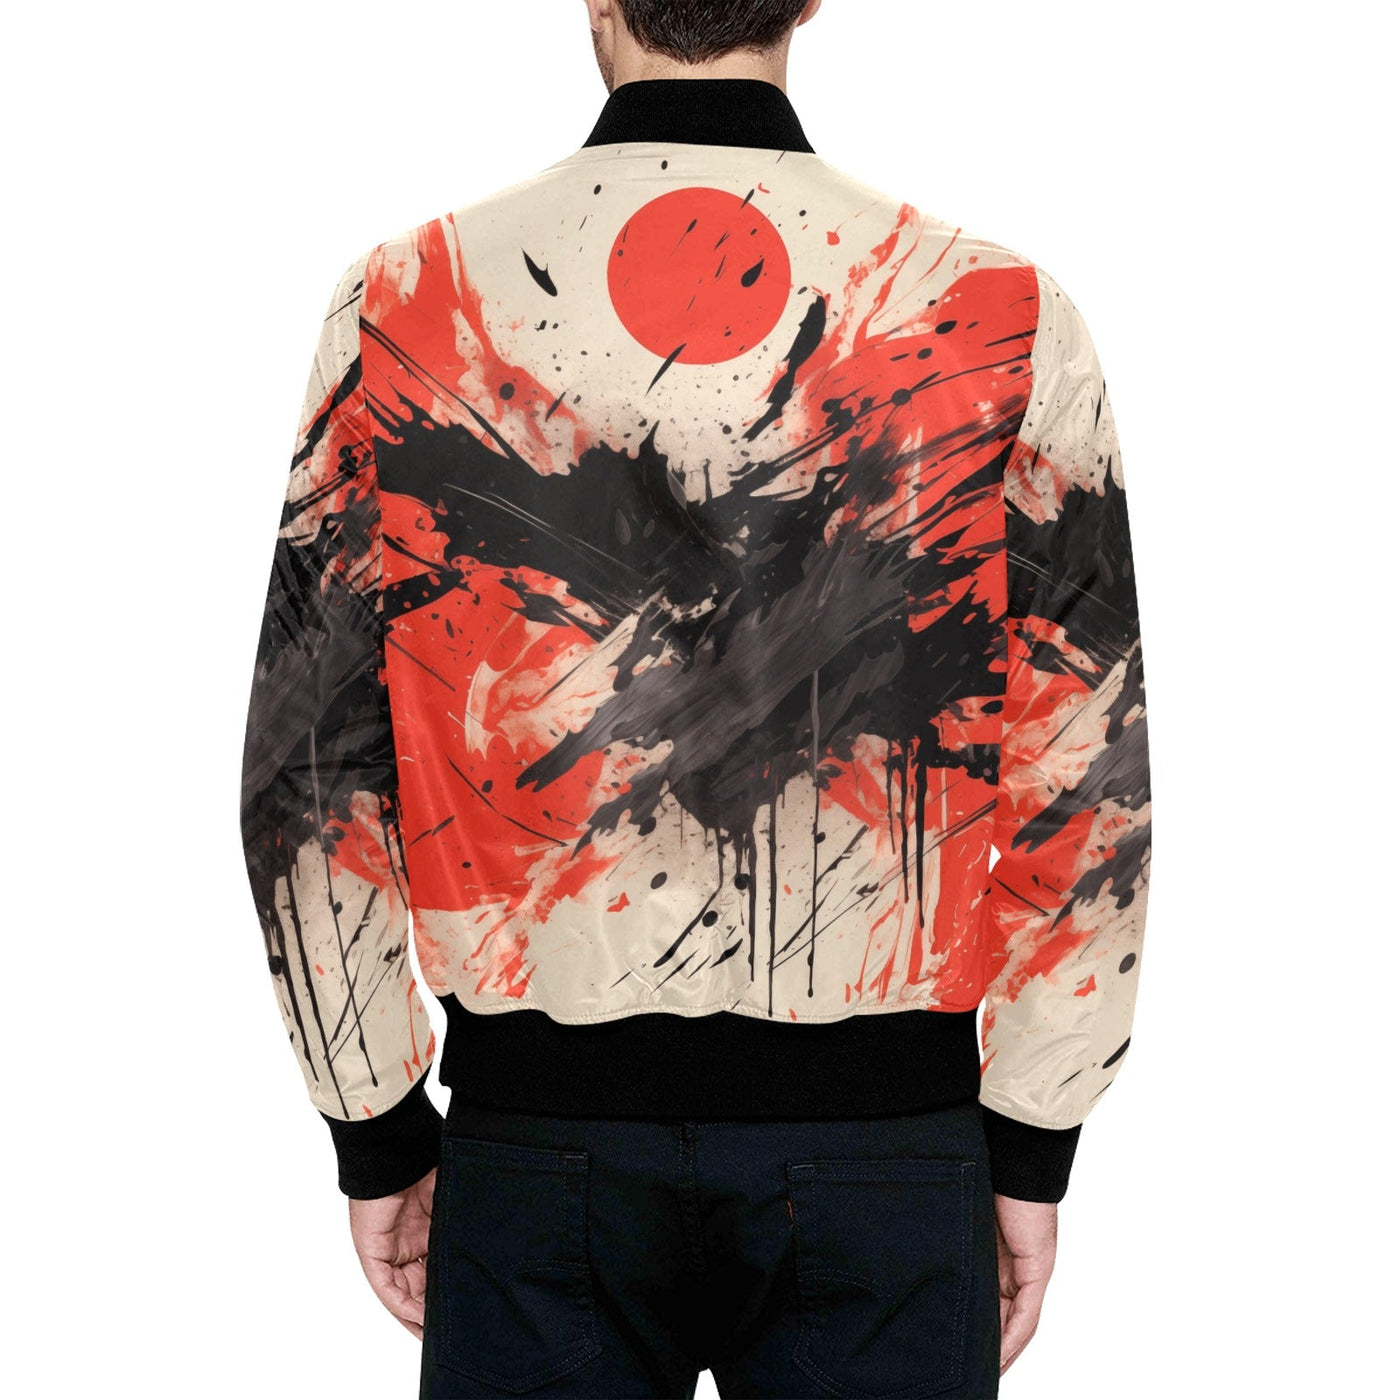 Radiant Sunrise: Japanese Abstract Design quilted Bomber Jacket